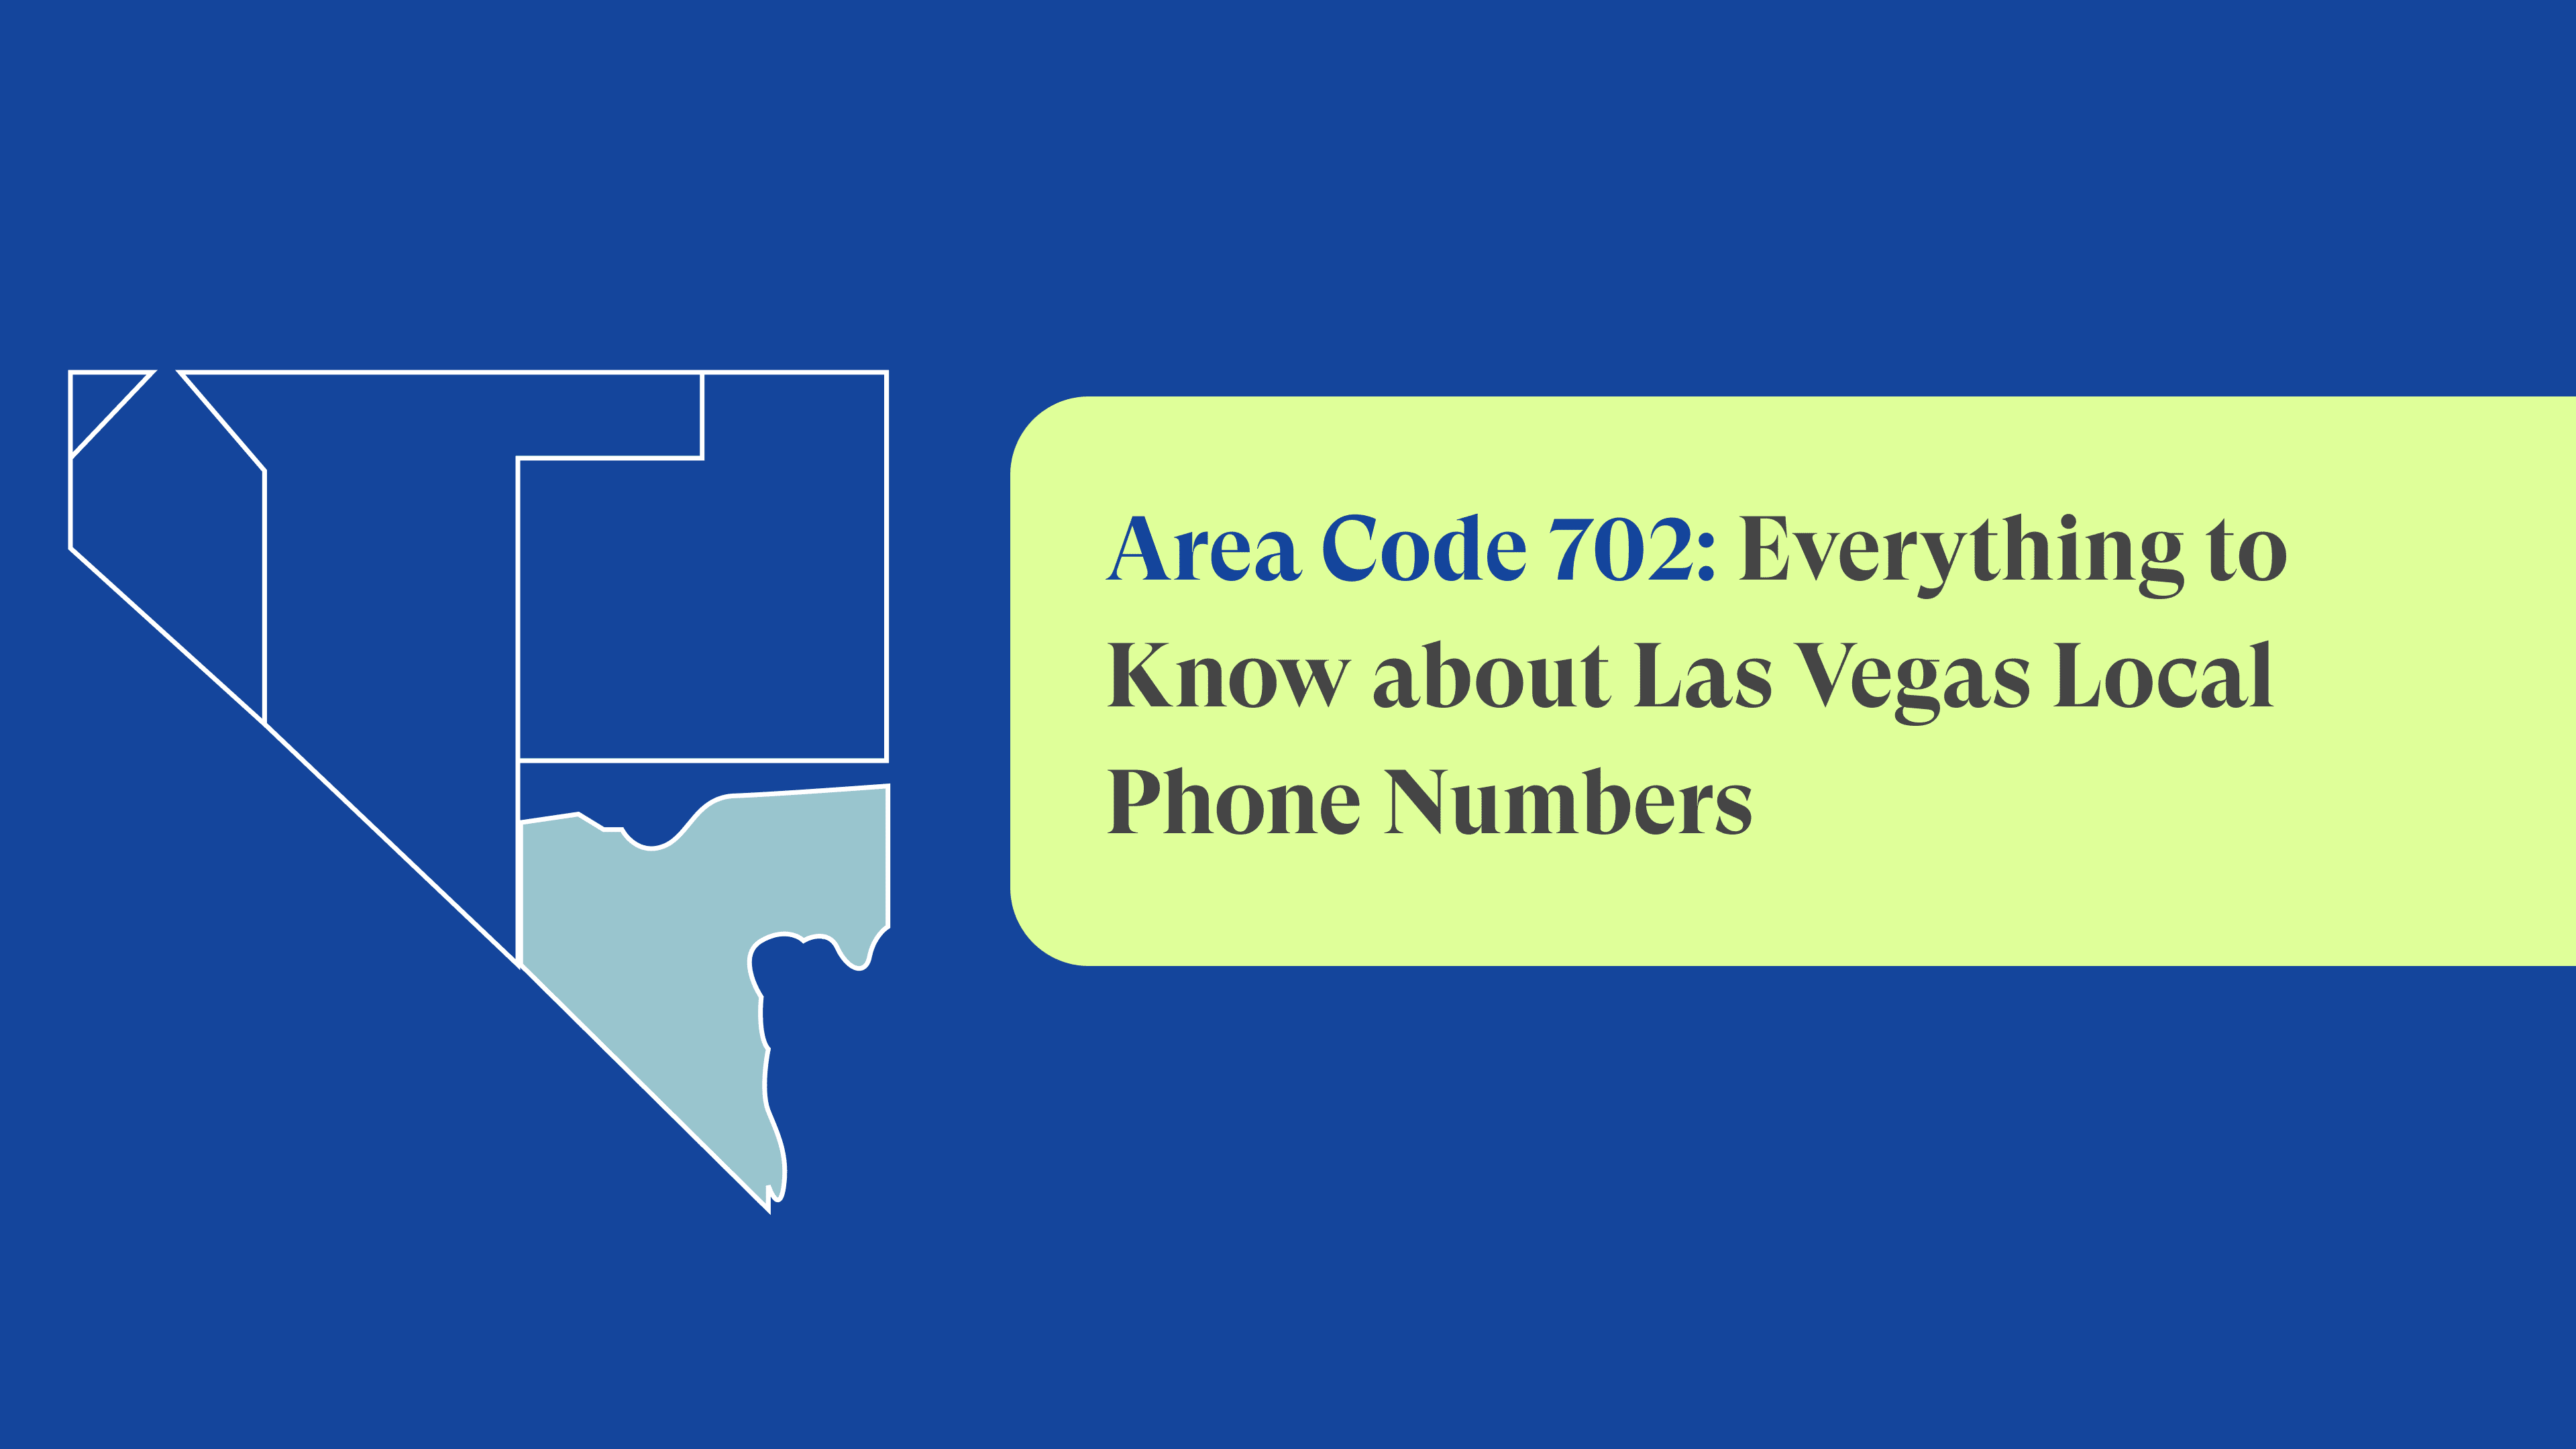 Area Code 702: Everything to Know about Las Vegas Local Phone Numbers